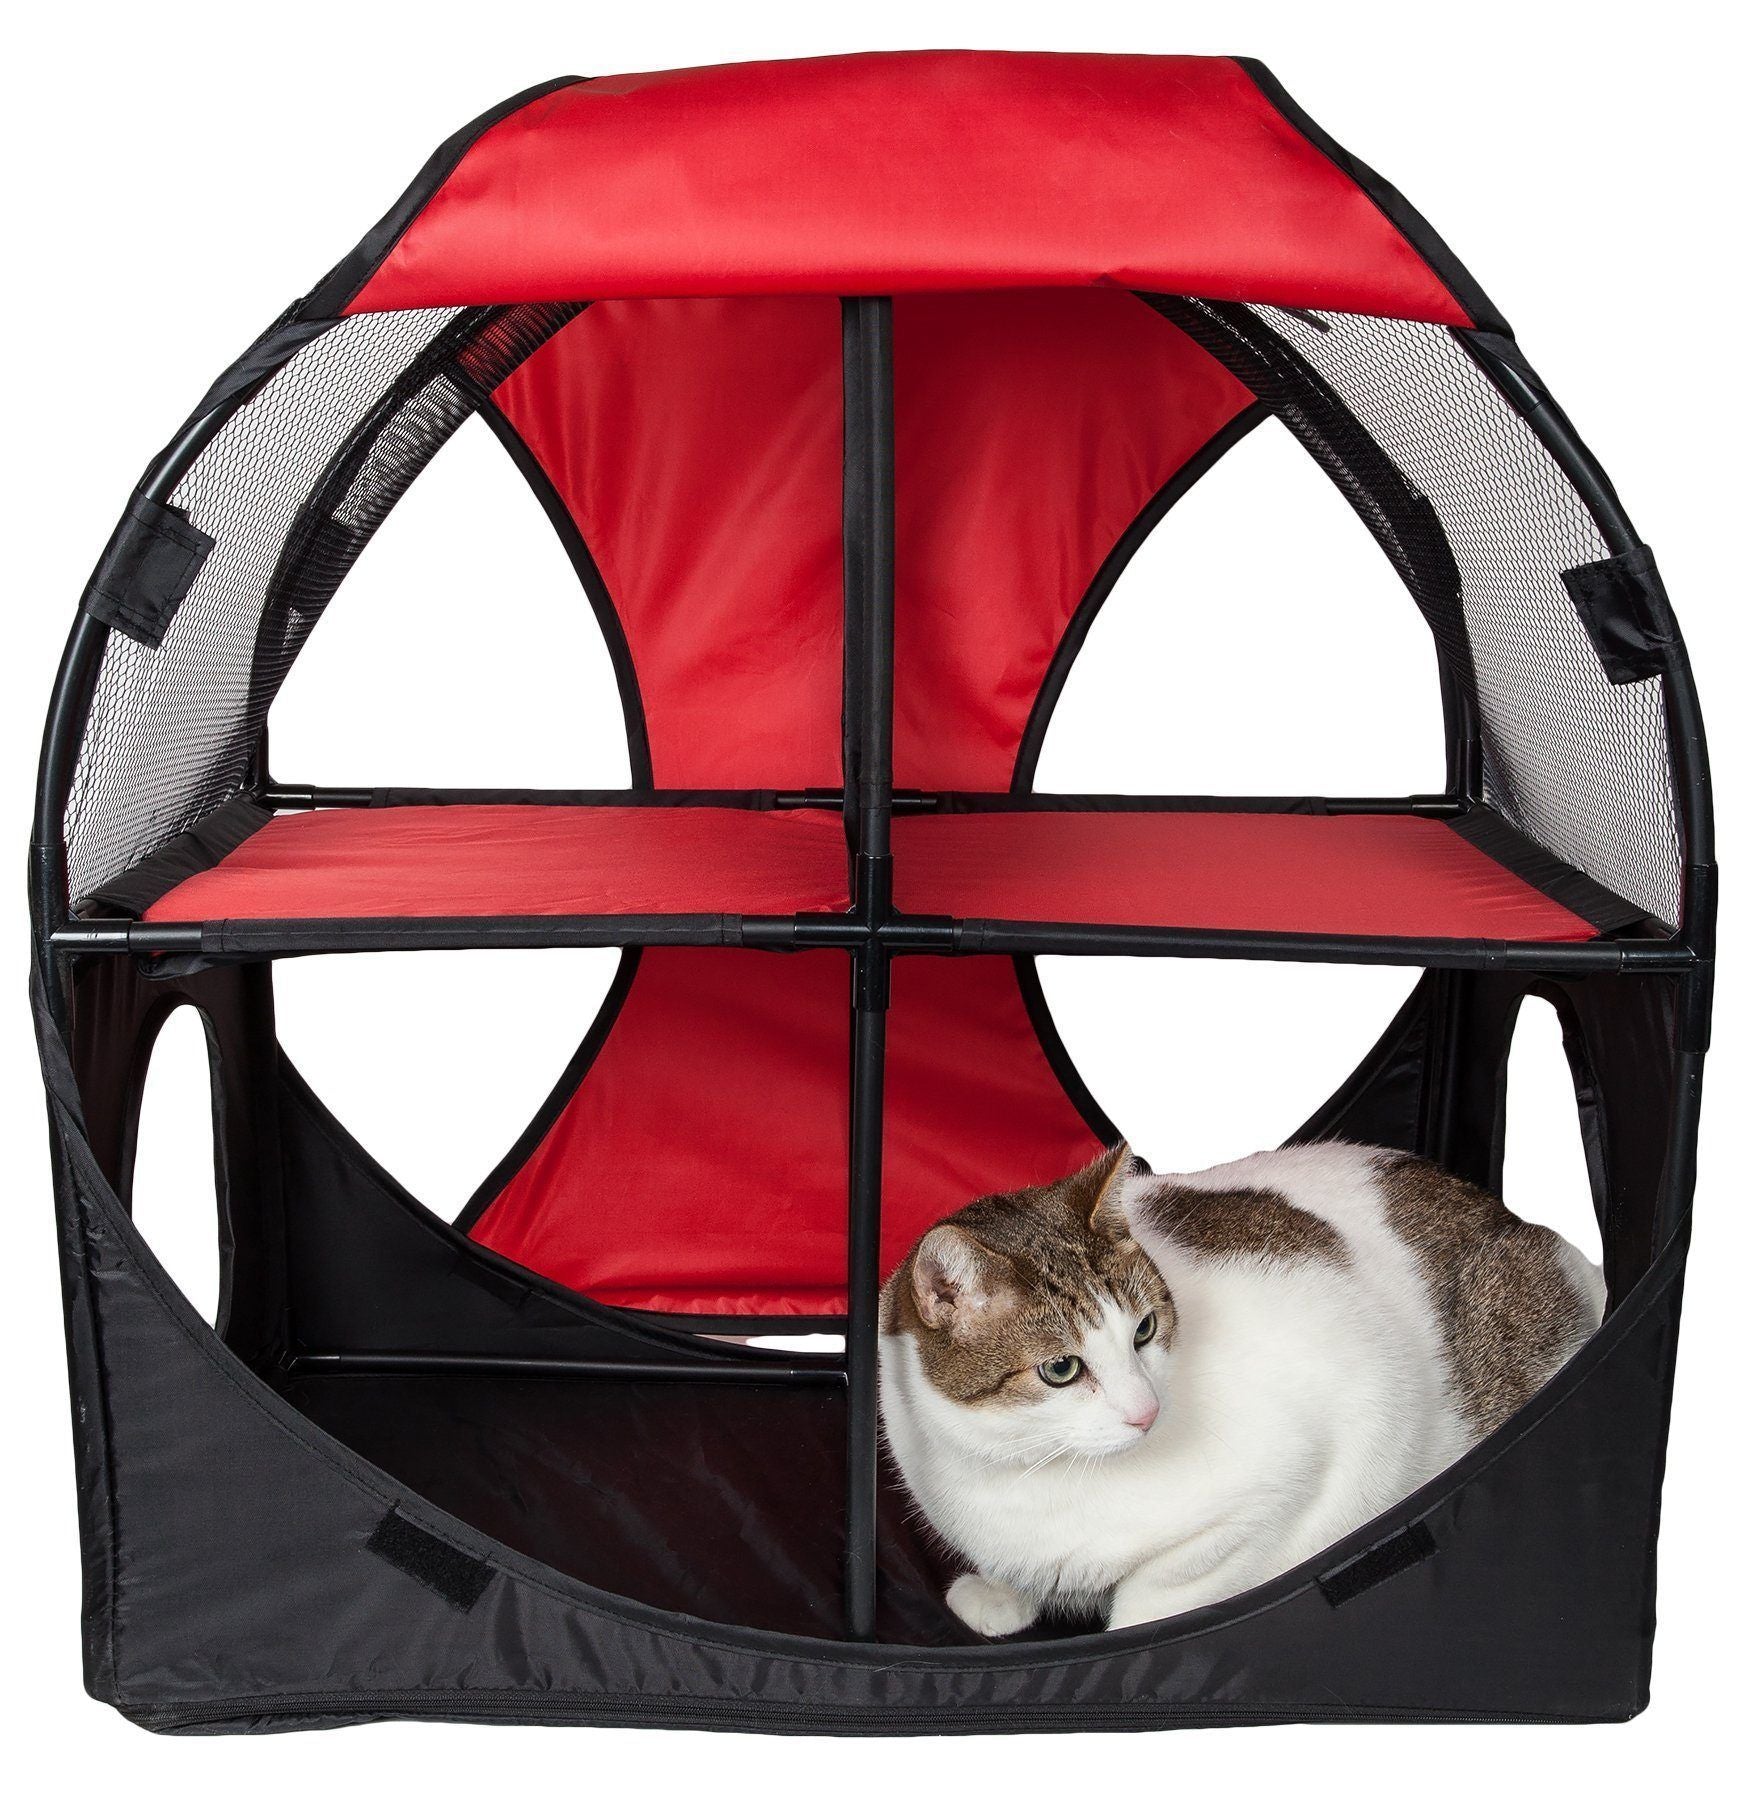 Pet Life ® 'Kitty-Play' Collapsible Travel Interactive Kitty Cat Tree Maze House Lounger Tunnel Lounge Red, Black 